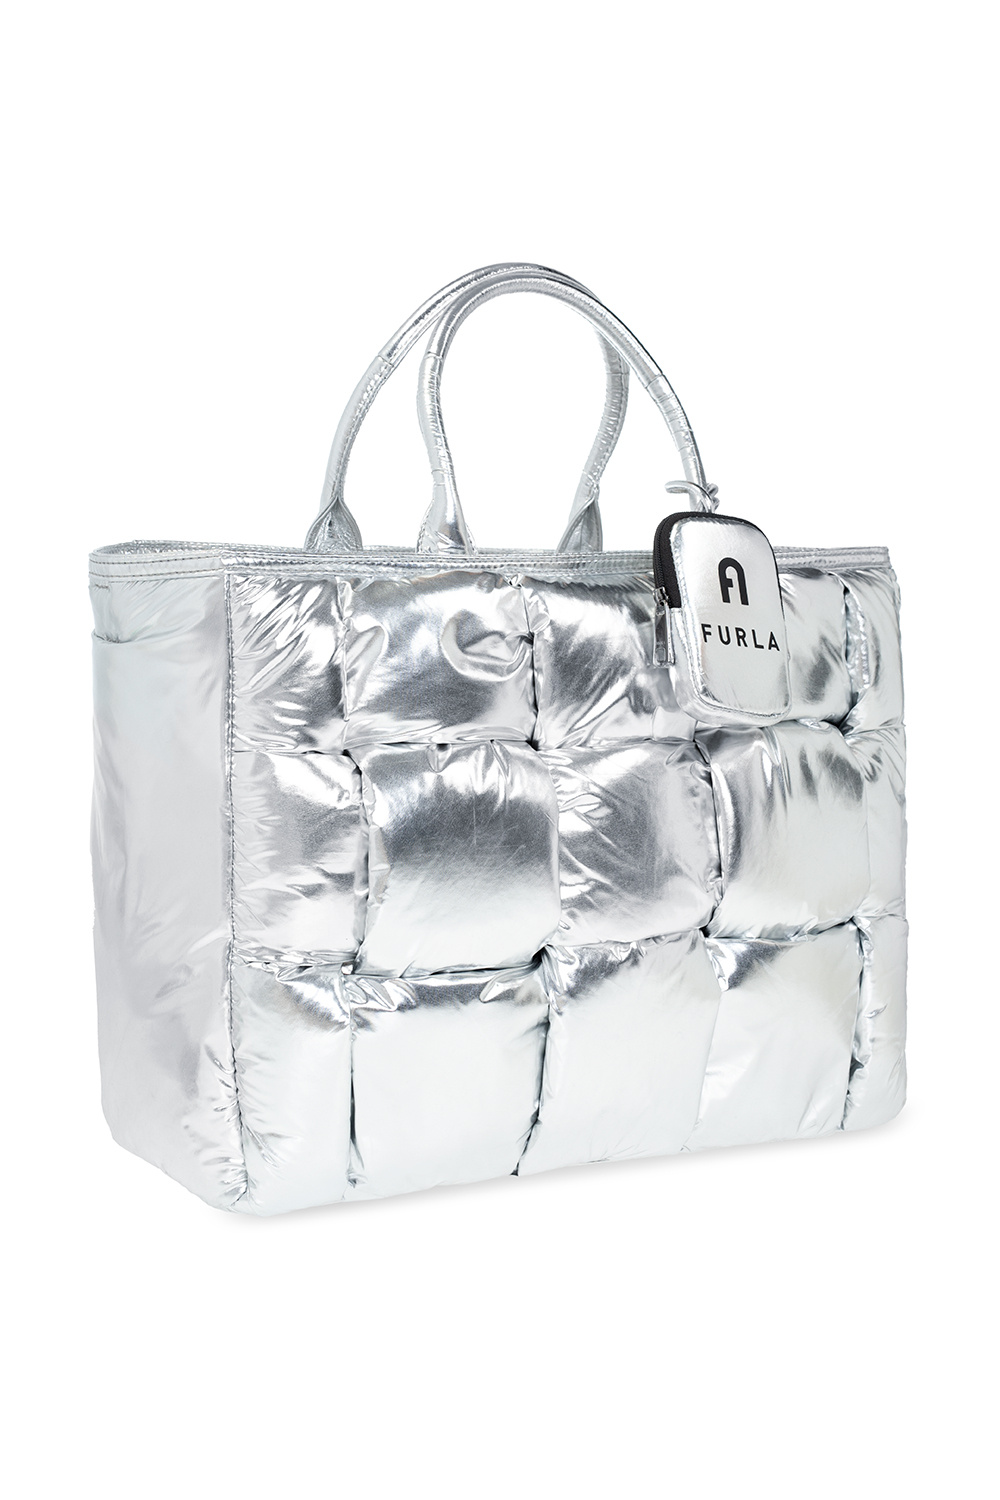 Furla 1042-1552S OPPORTUNITY Large Tote Light PACIFIC Tote Bag